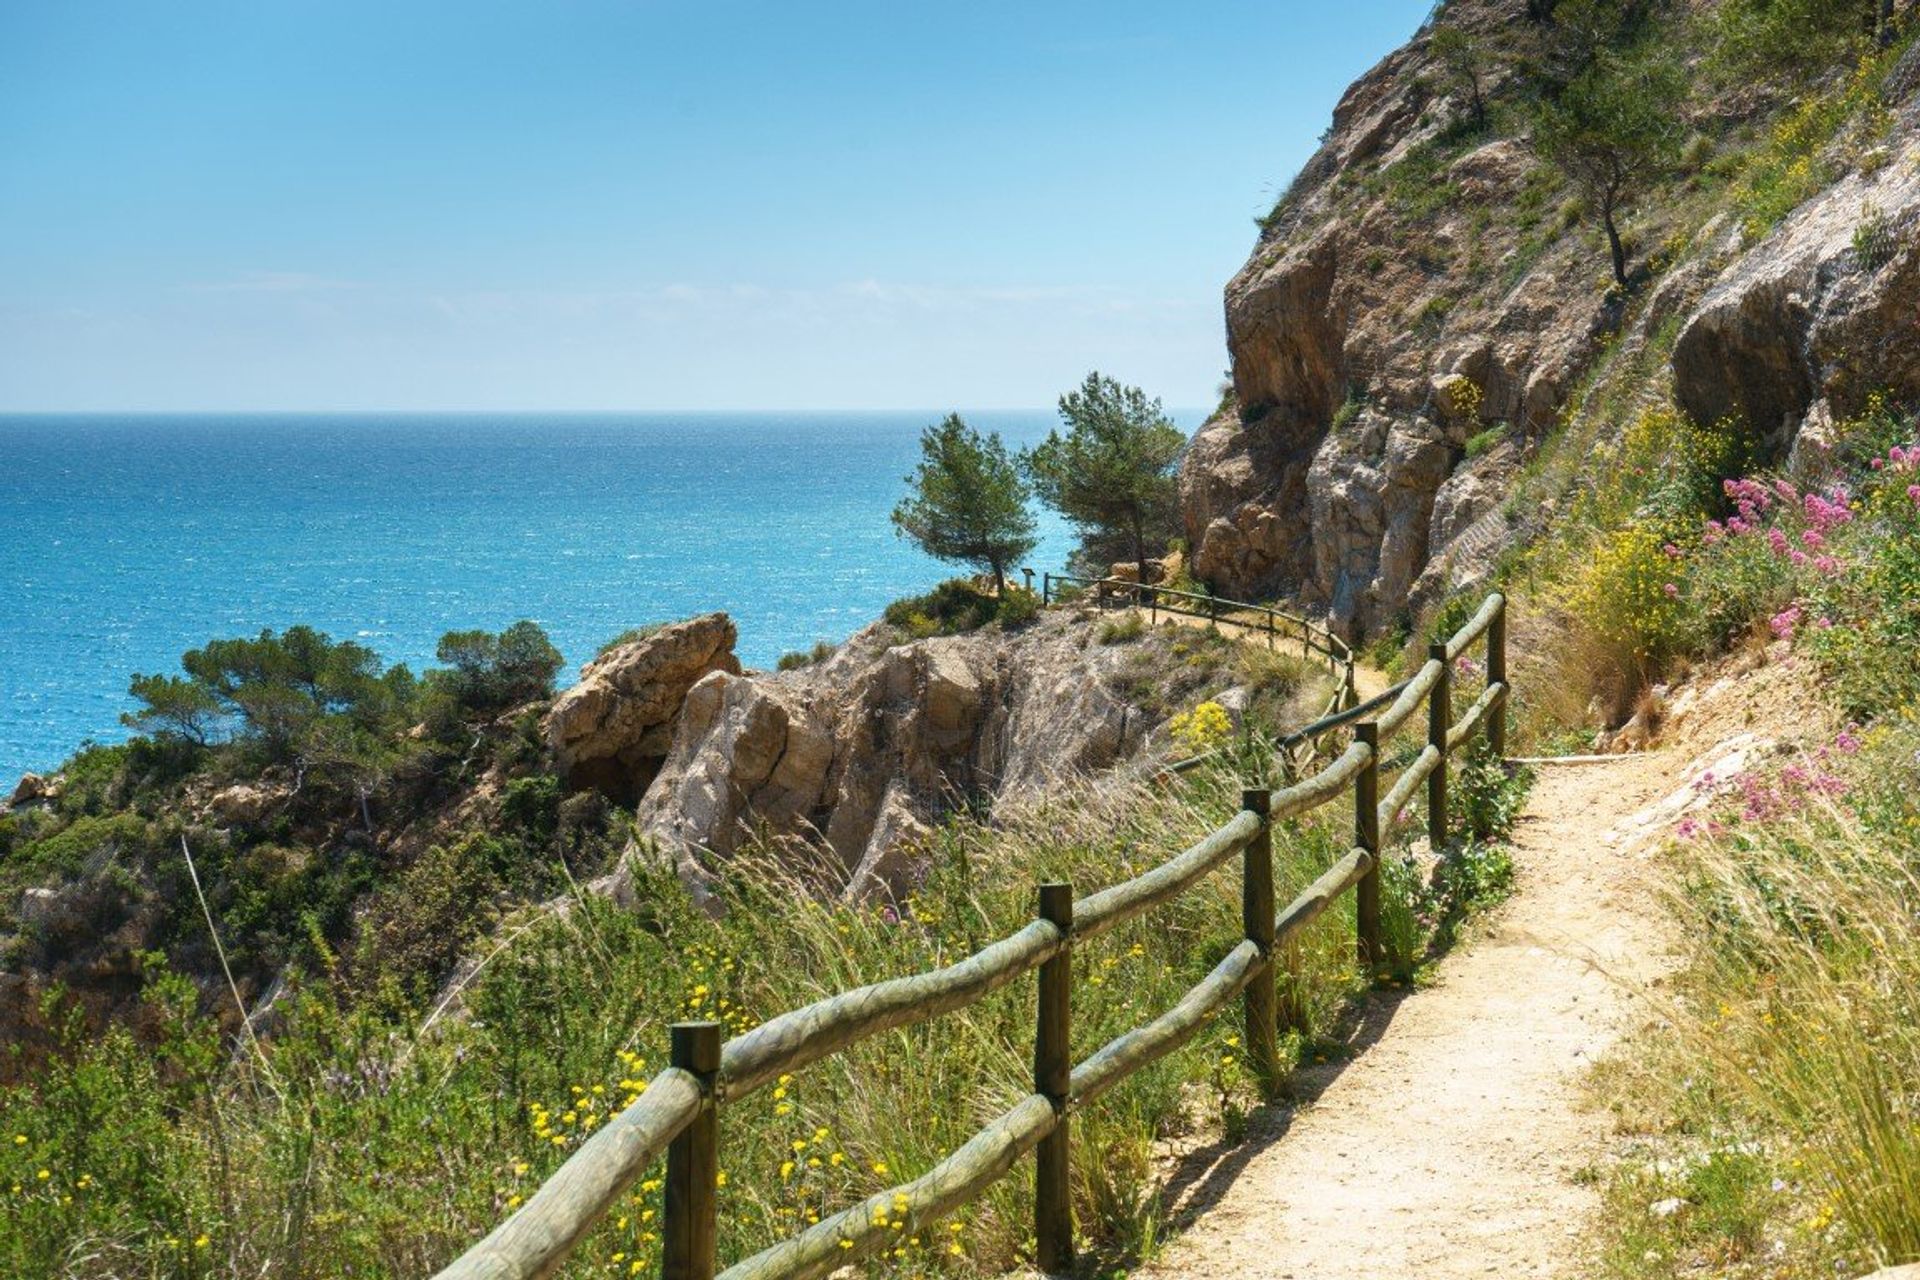 Benitachell's landscape is the perfect place for coastal walks, with plenty of routes leading to Denia and Calpe